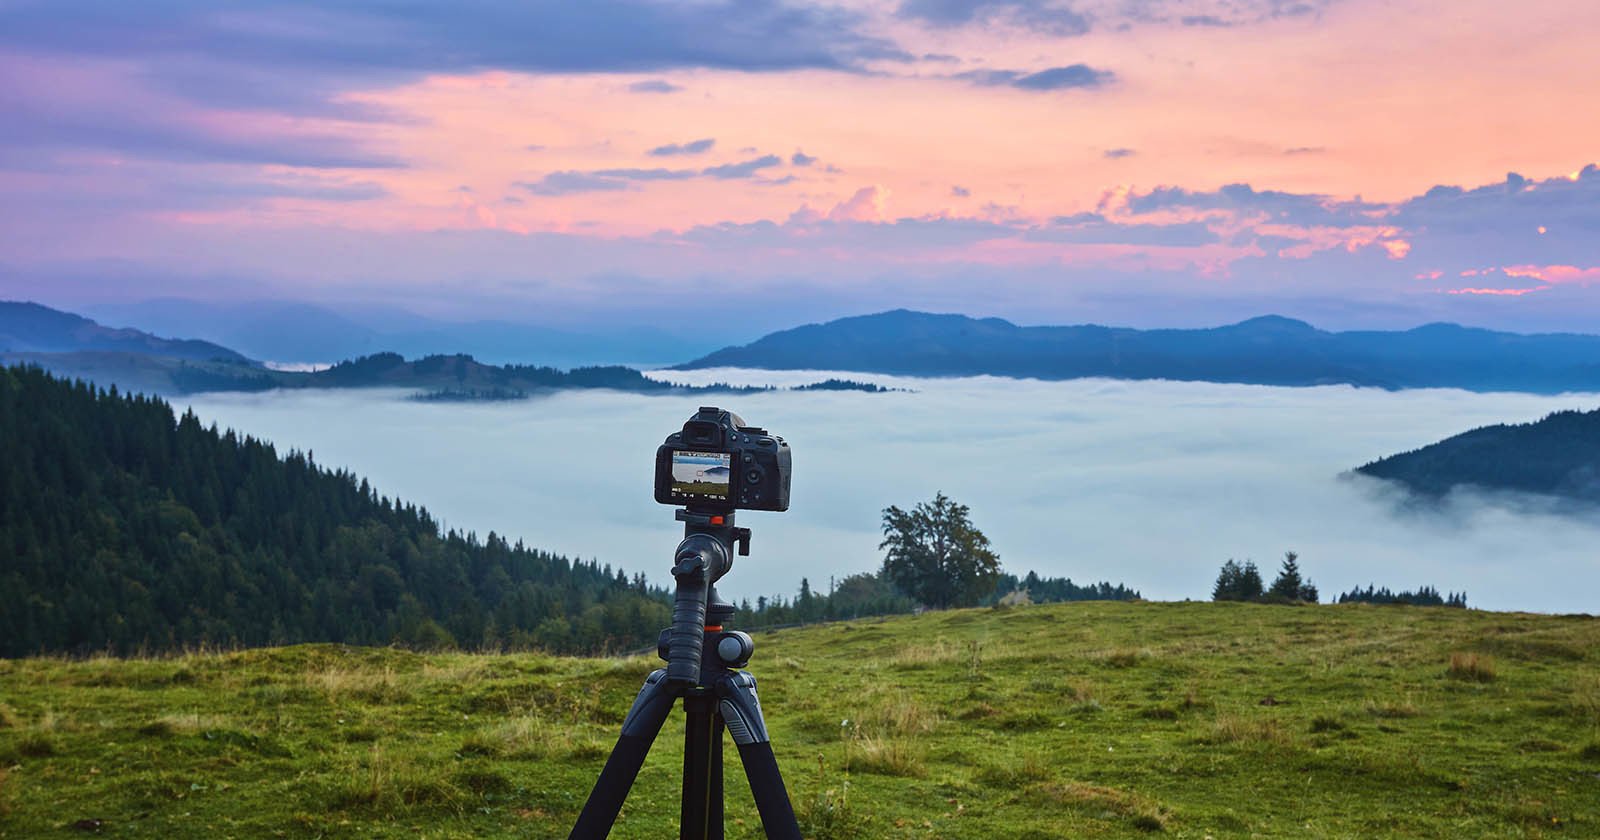 16 Types of Landscape Photography